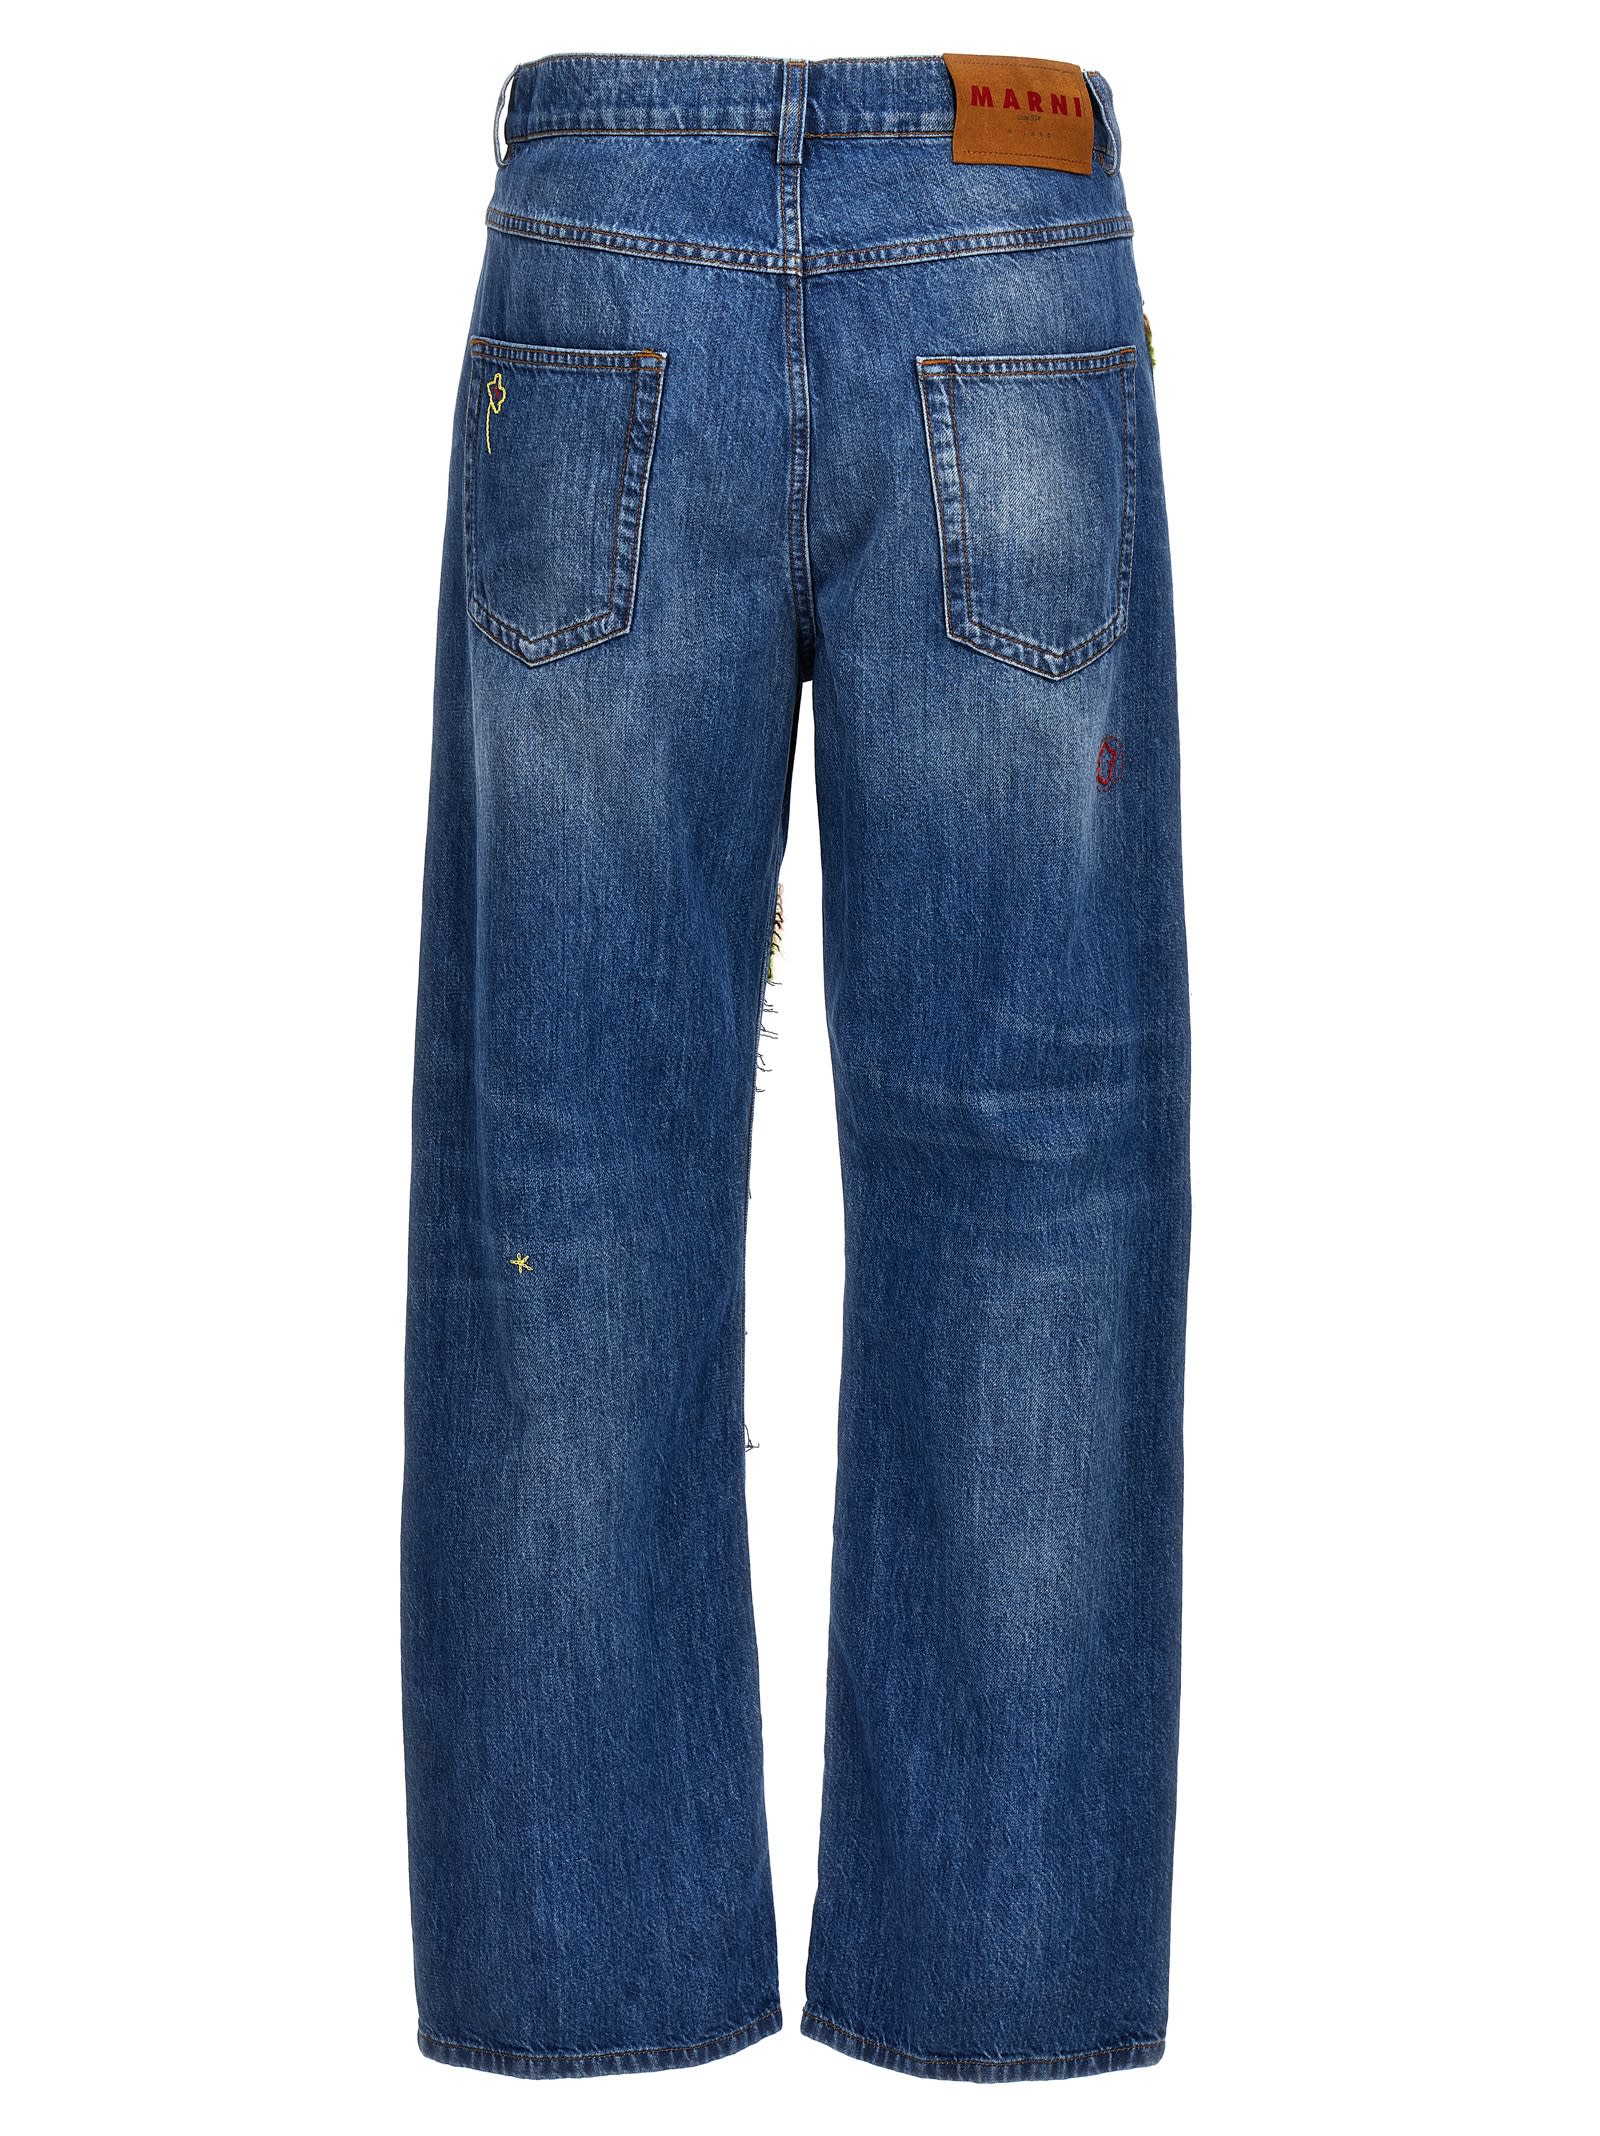 Shop Marni Embroidery Jeans And Patches In Denim